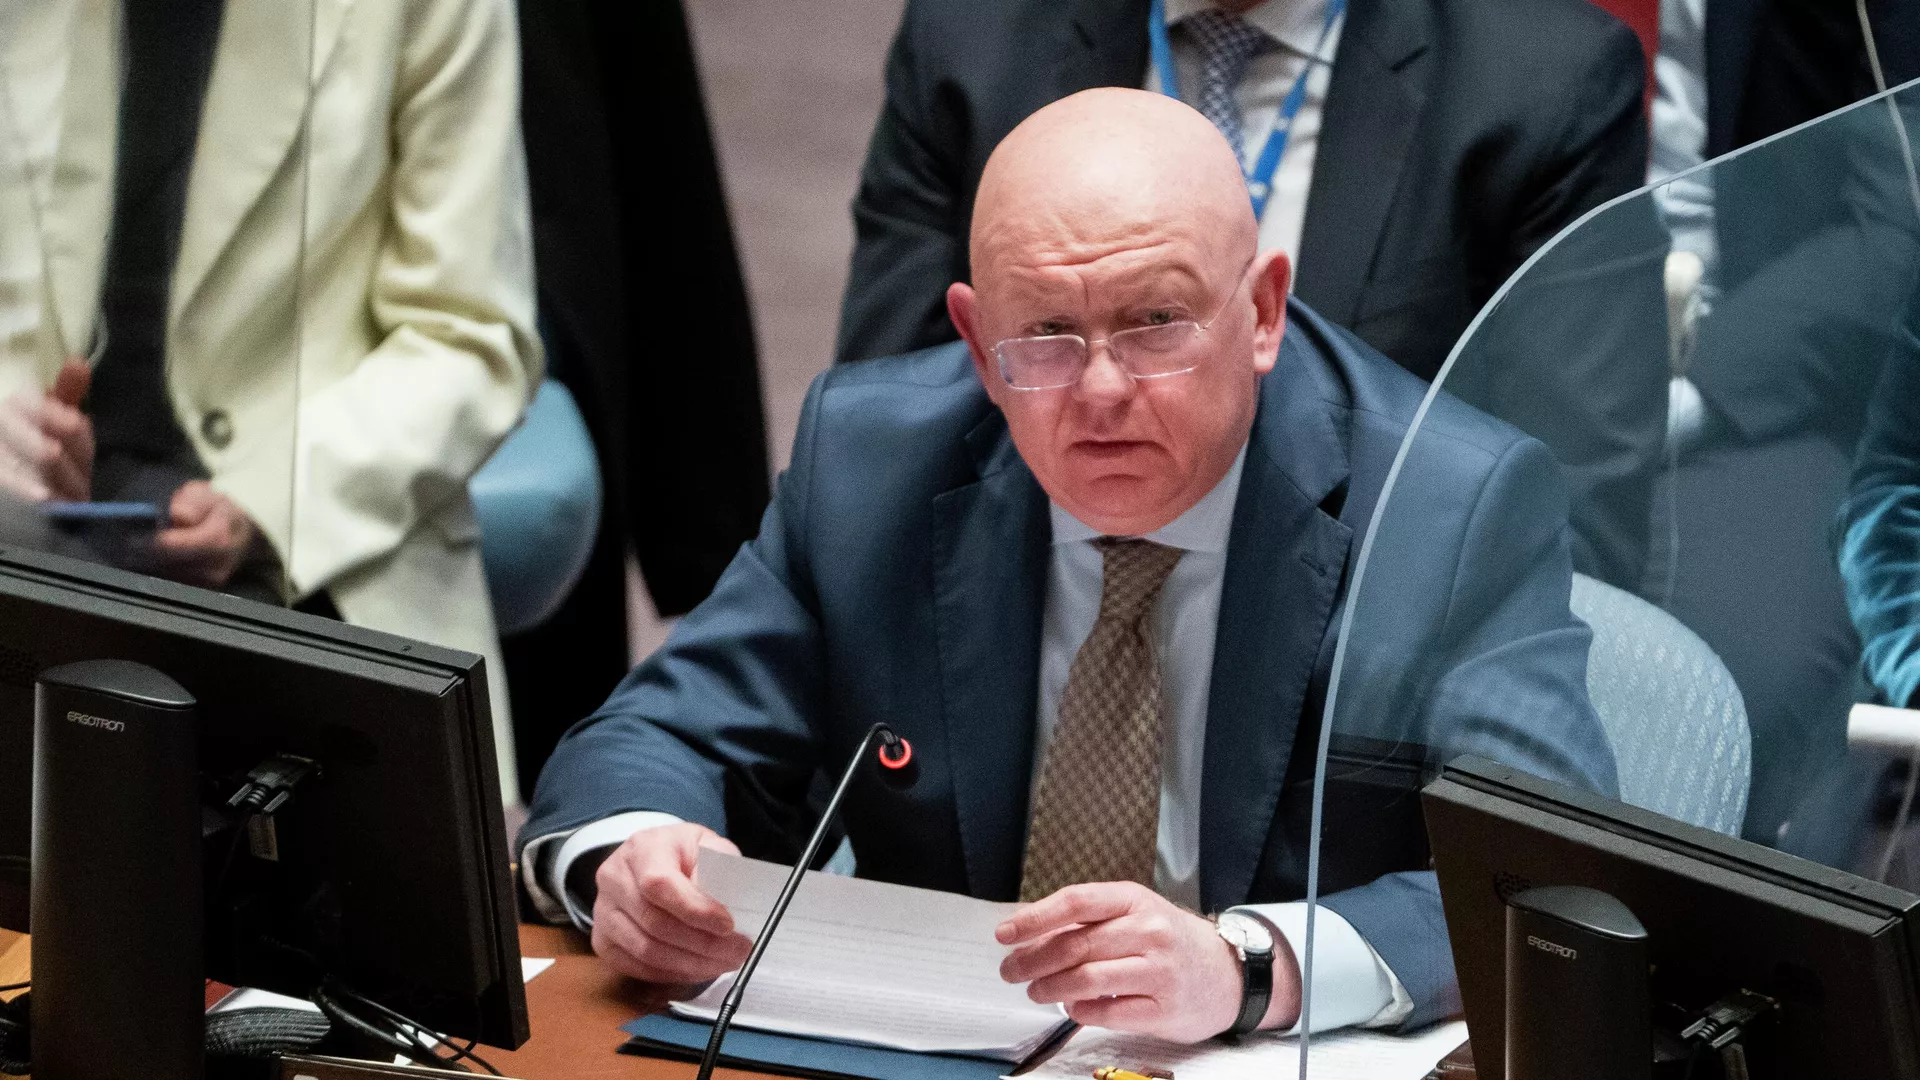 Kiev Fails to Attract Neutral Countries to Implement Its 'Peace Formula' - Russia's UN Envoy